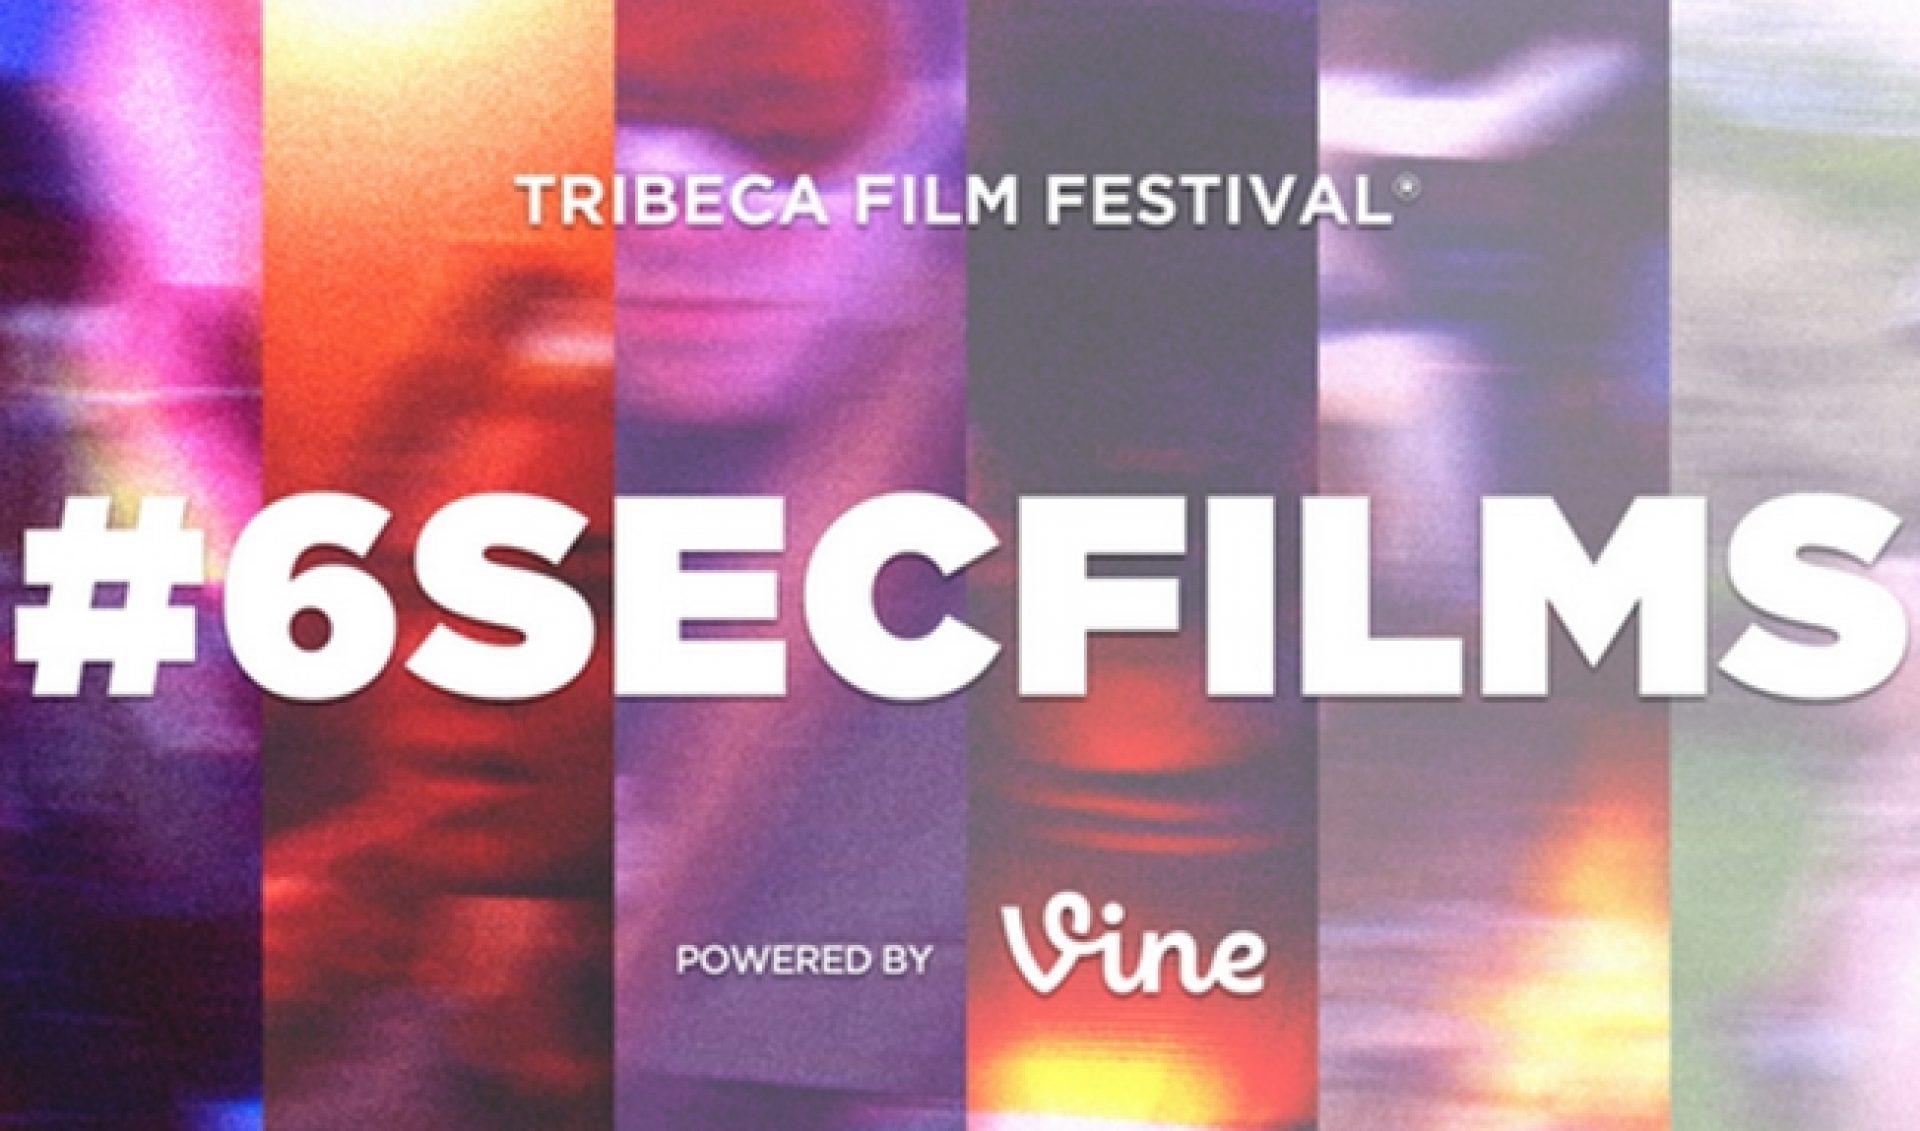 Tribeca Film Festival Honors The Coolest, Artiest Vines It Can Find